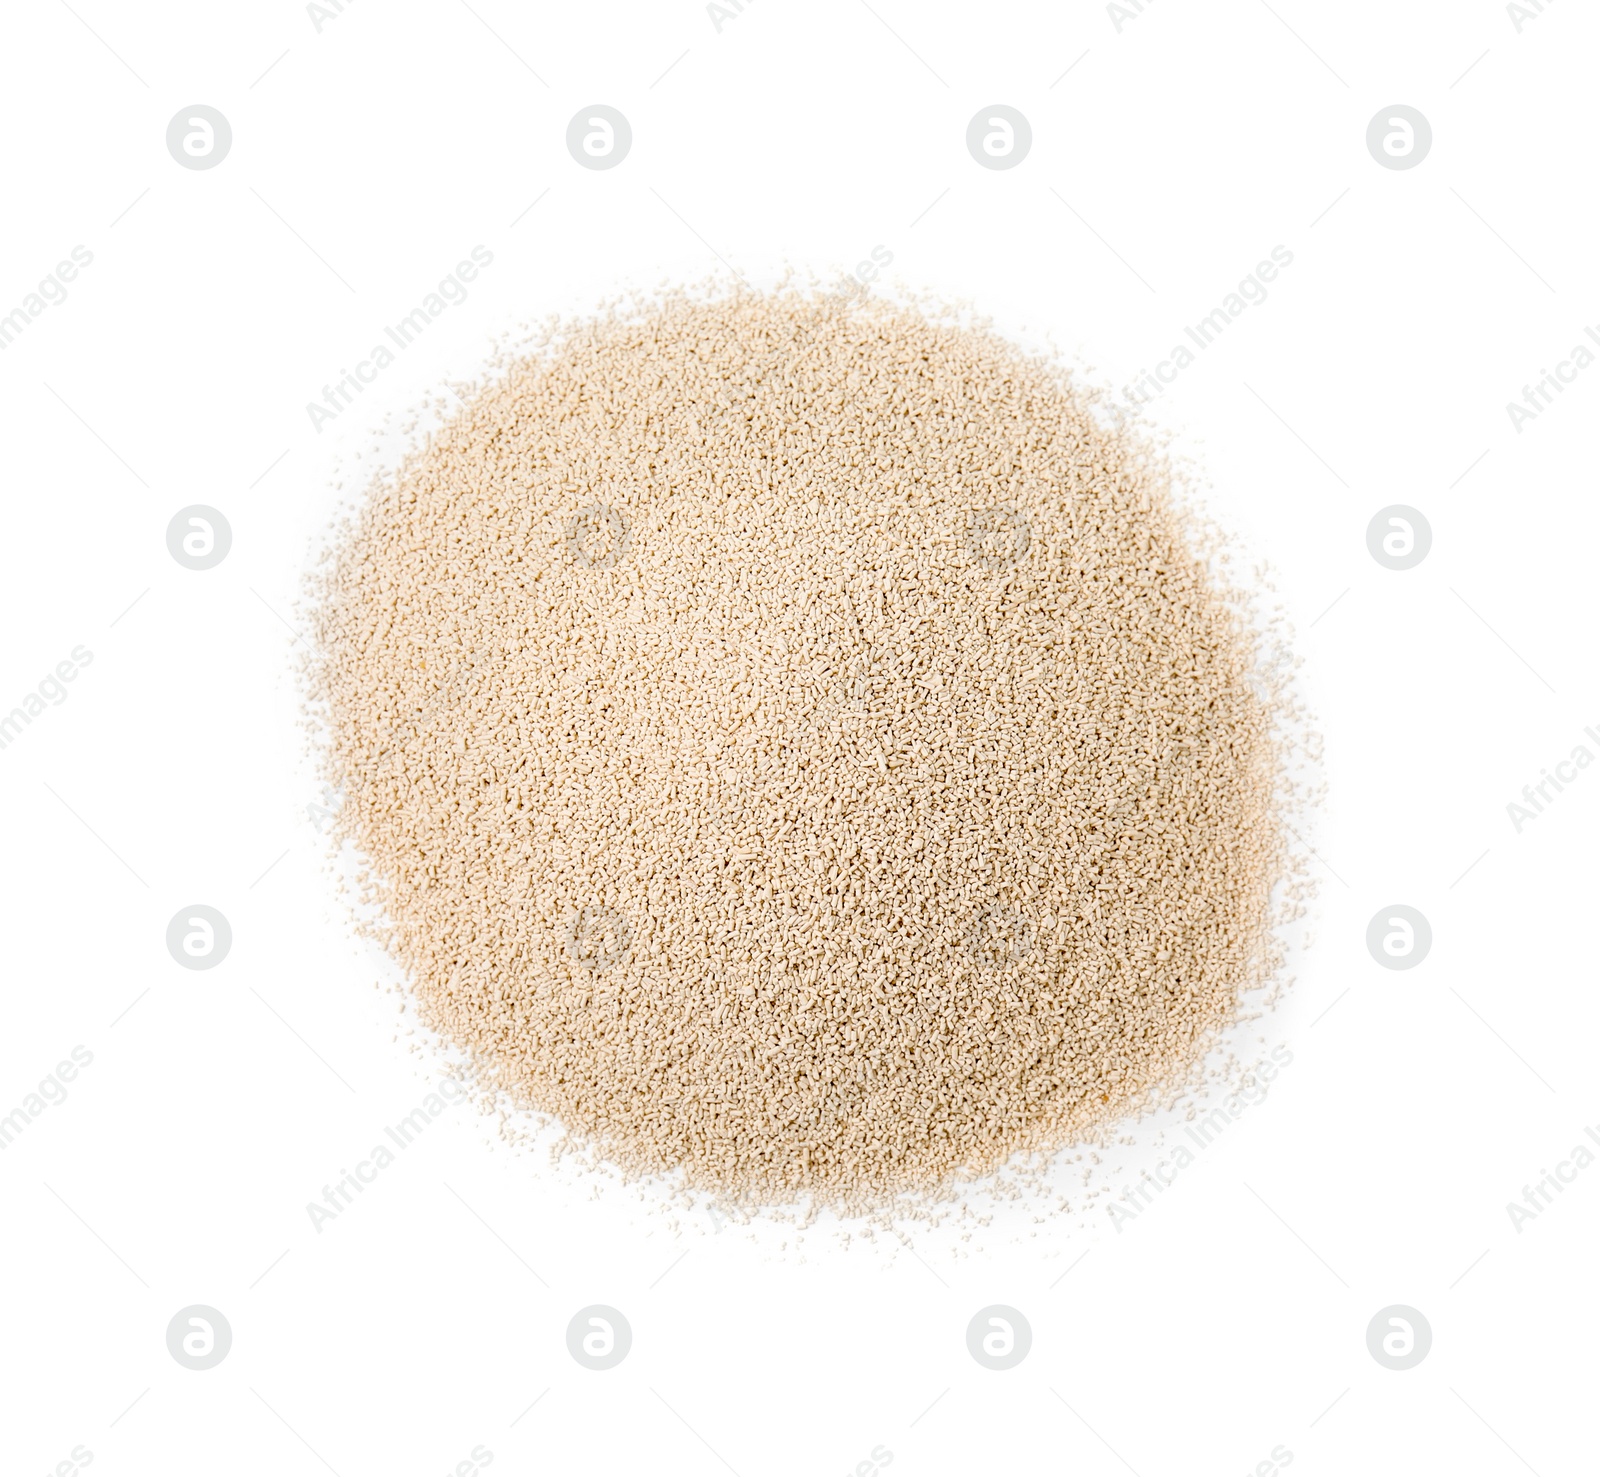 Photo of Pile of granulated yeast isolated on white, top view